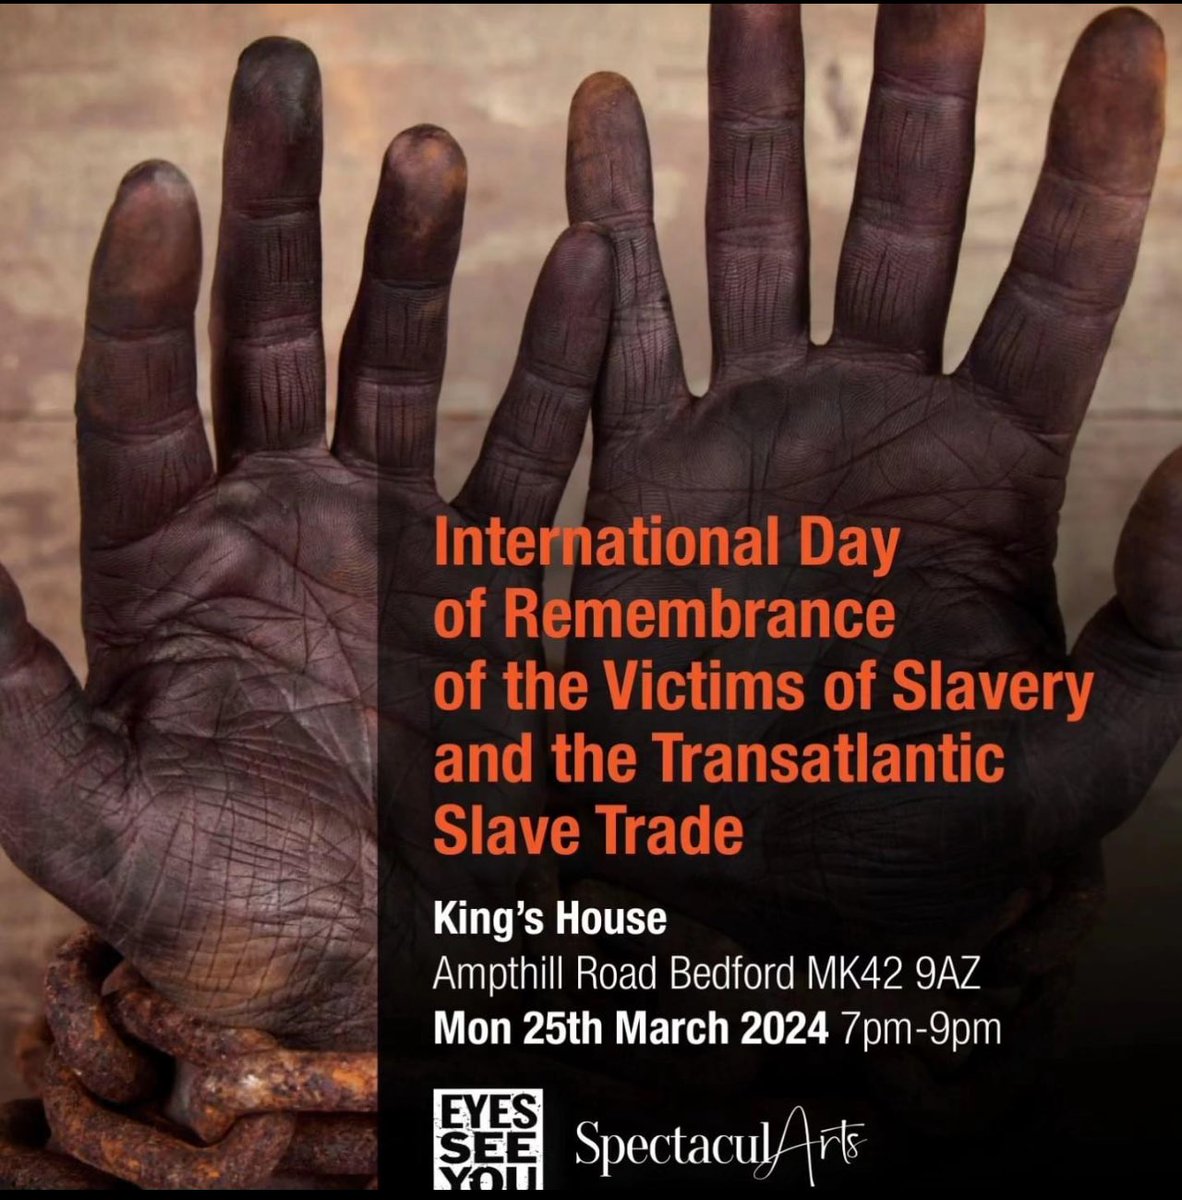 We’re supporting @Spectacularts1 for the Intentional Day of Remembrance of the Victims of Slavery and Transatlantic Slave ‘Trade’ .. Will you be there ? eventbrite.co.uk/e/25th-march-i…